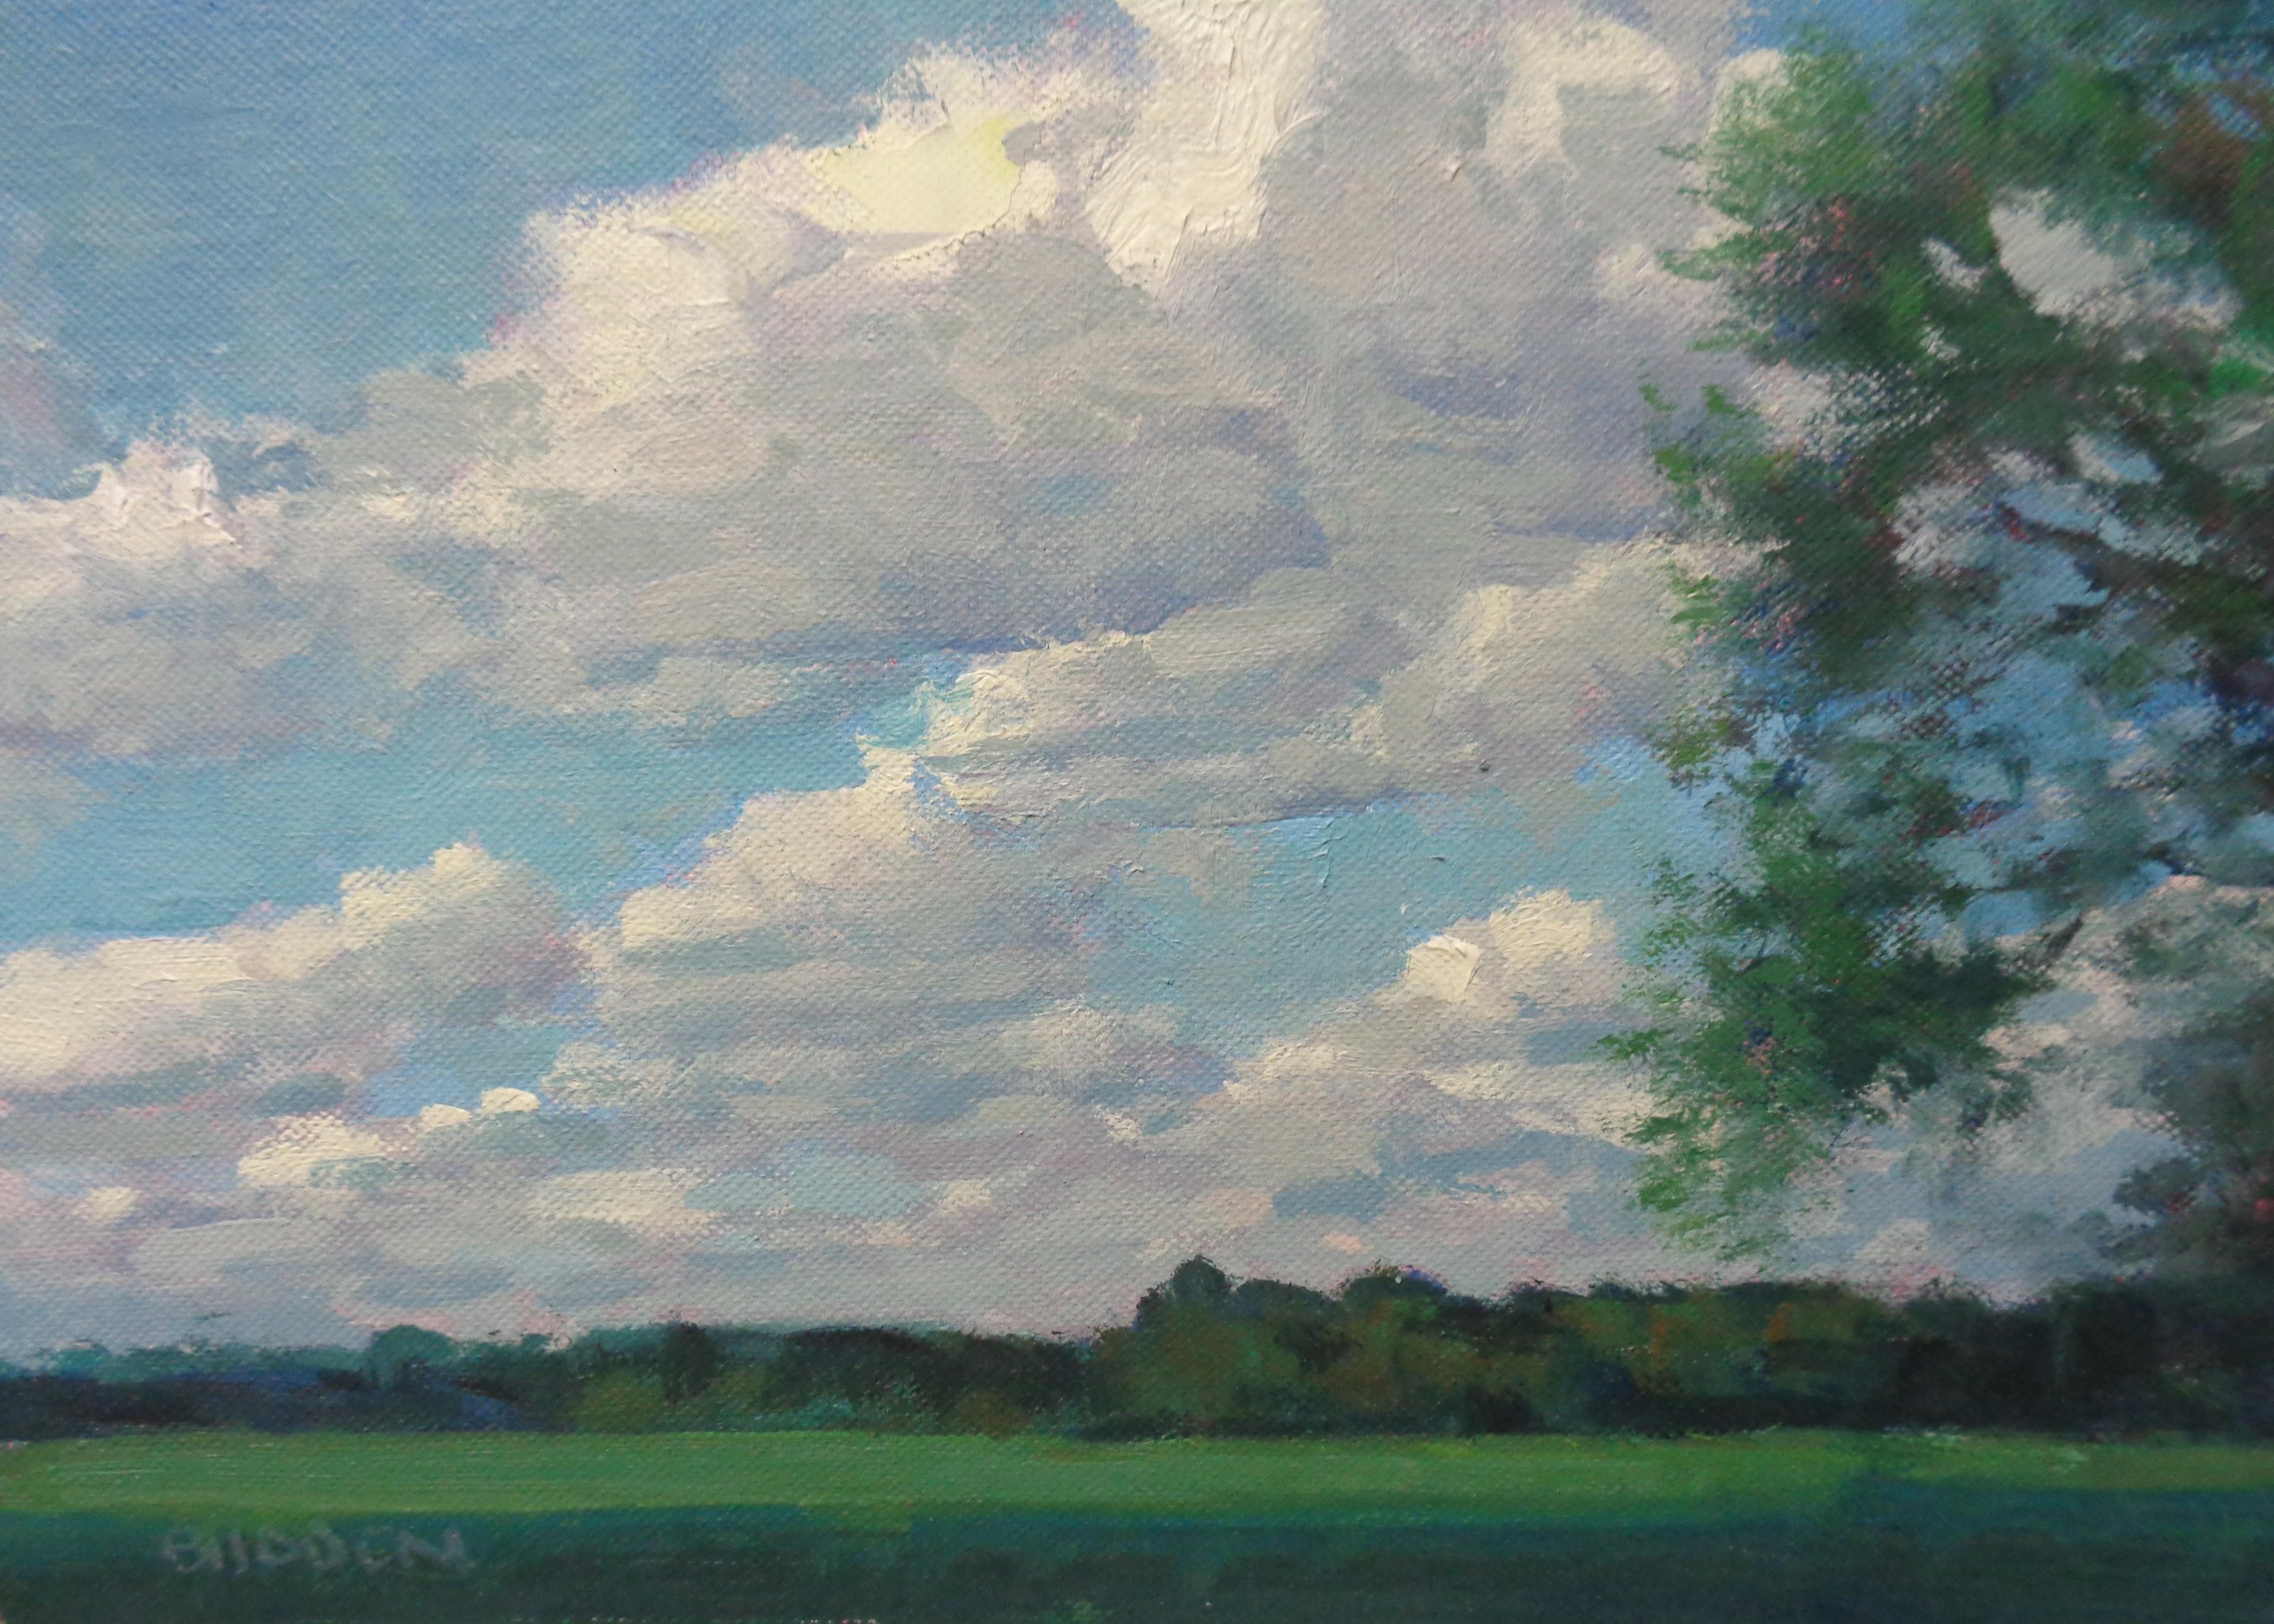 Impressionistic Landscape Oil Painting Summer Sky by Michael Budden  5